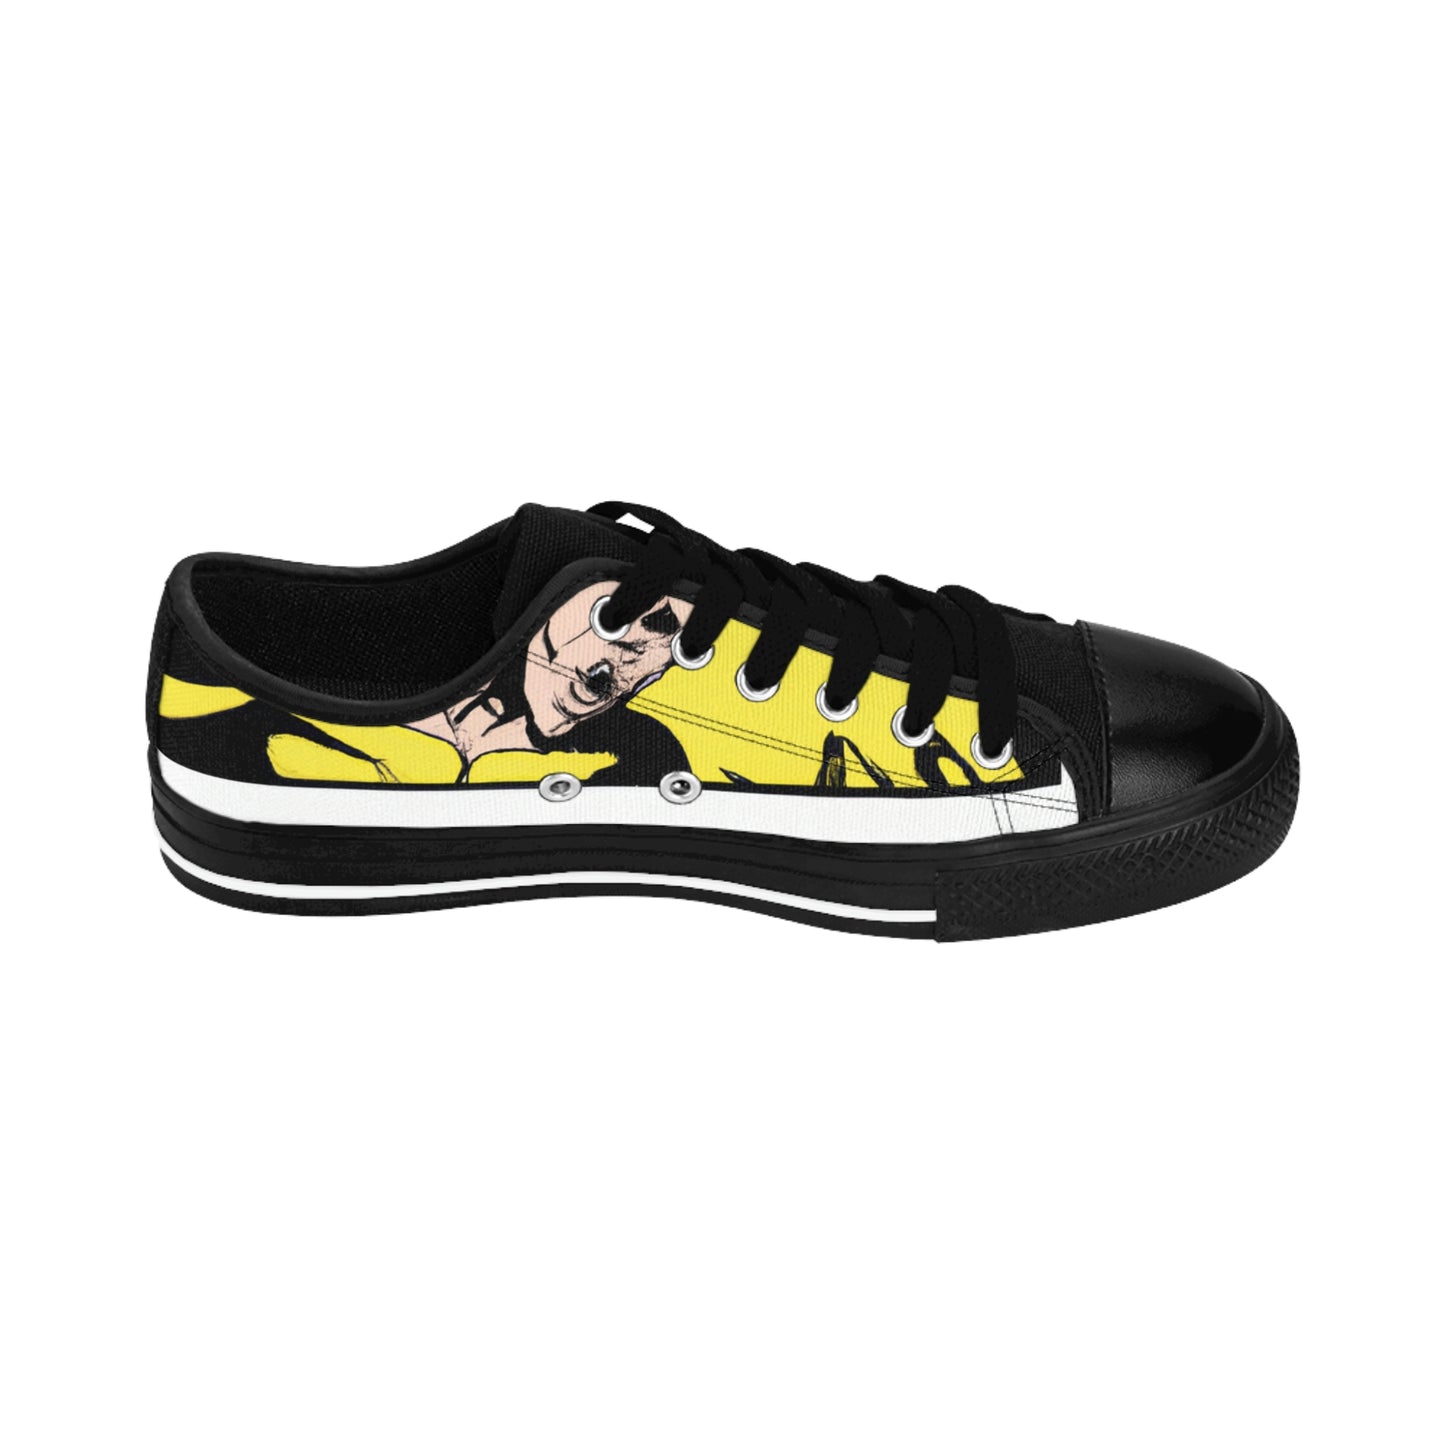 Casey of Camelot - Comic Book Low Top